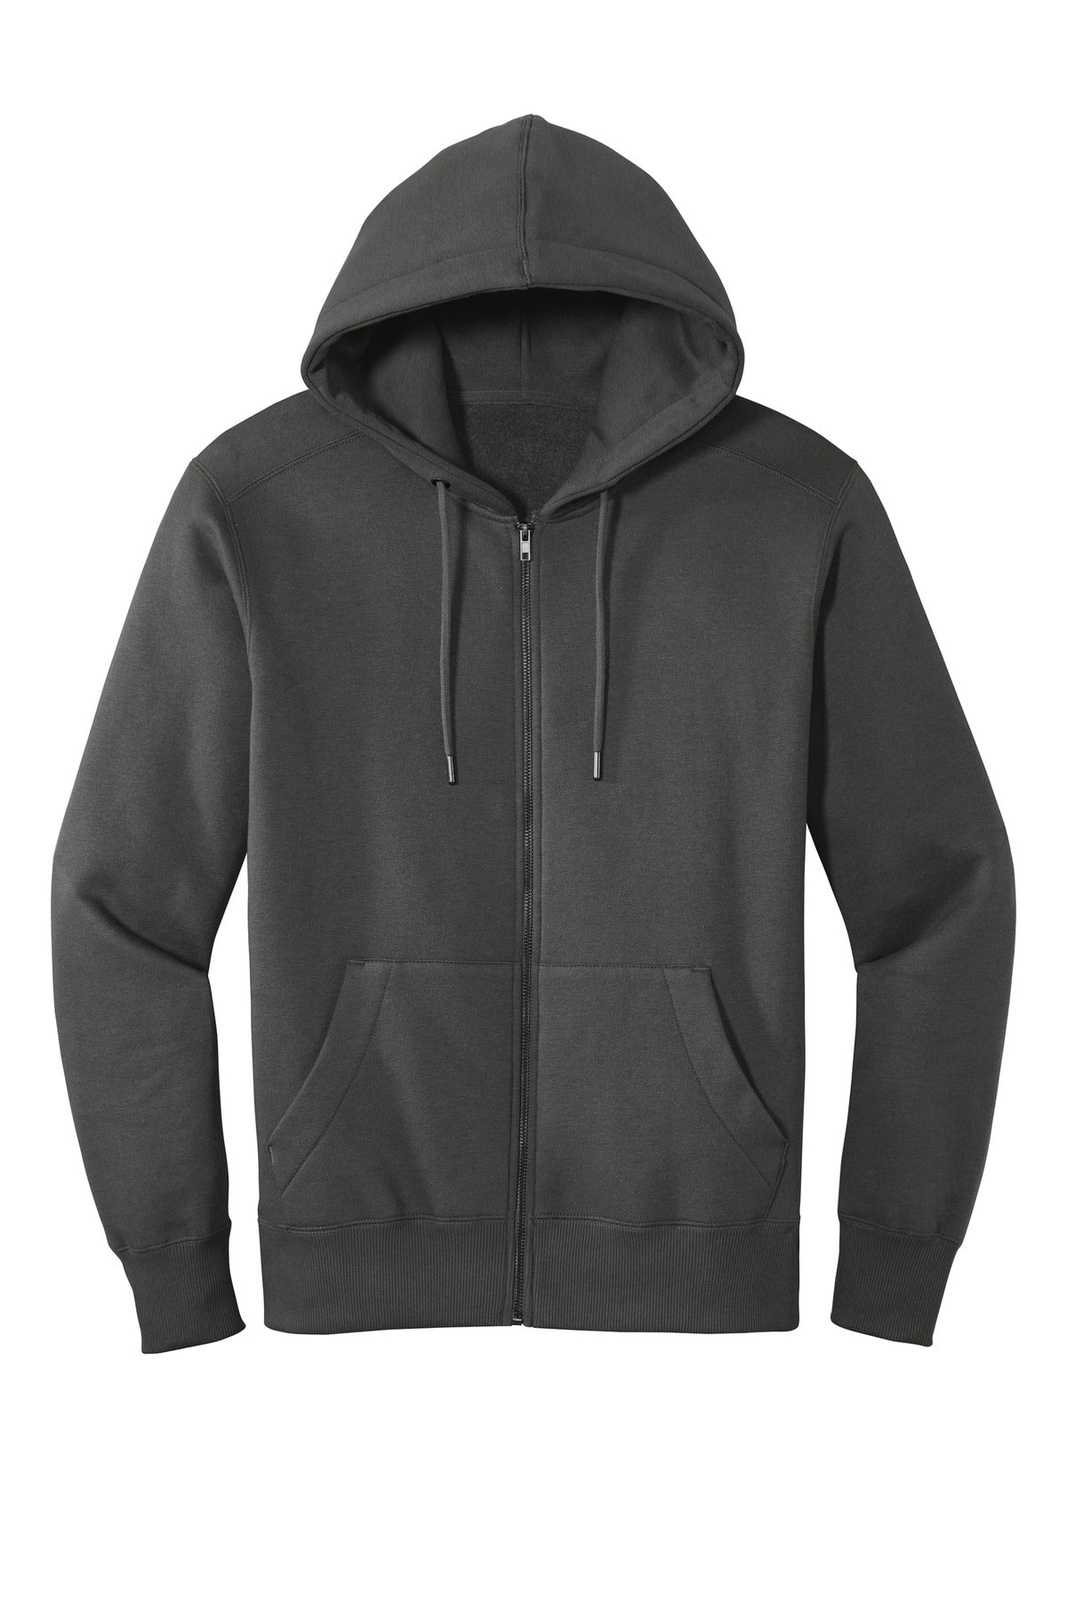 District DT1103 Perfect Weight Fleece Full-Zip Hoodie - Charcoal - HIT a Double - 5